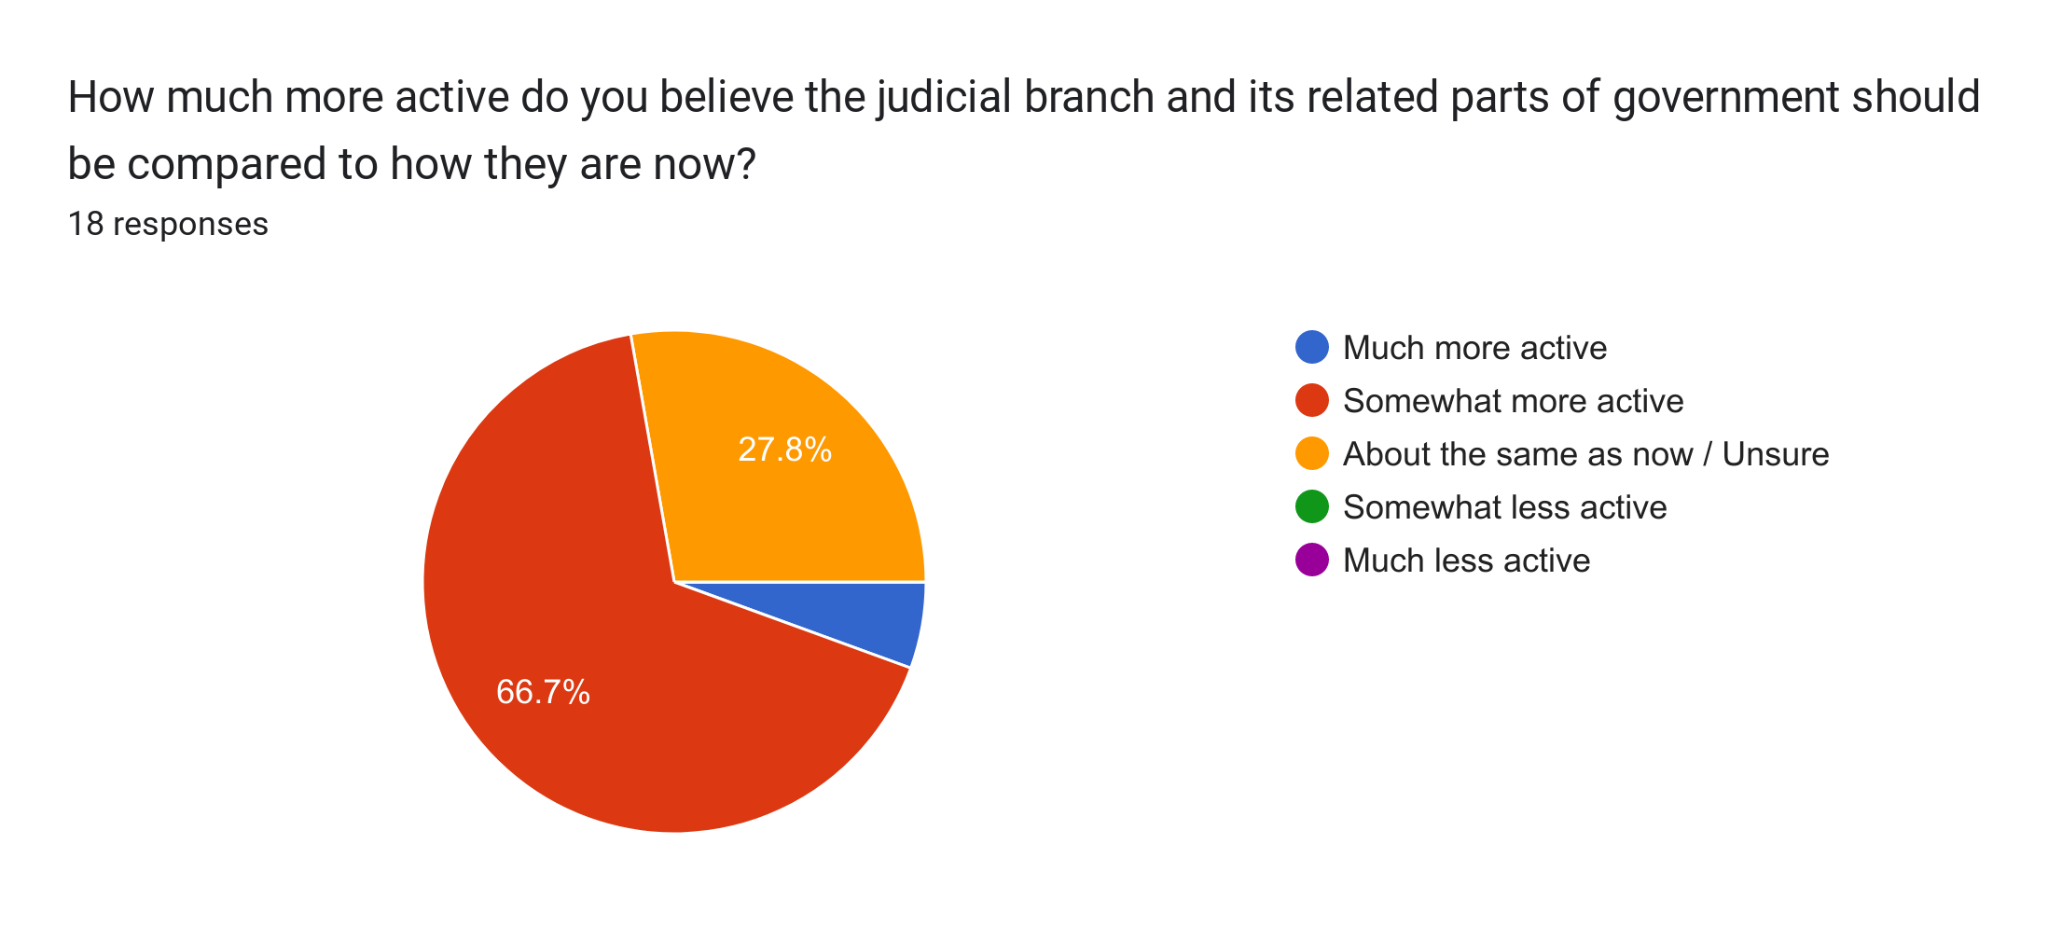 Forms response chart. Question title: How much more active do you believe the judicial branch and its related parts of government should be compared to how they are now?. Number of responses: 18 responses.